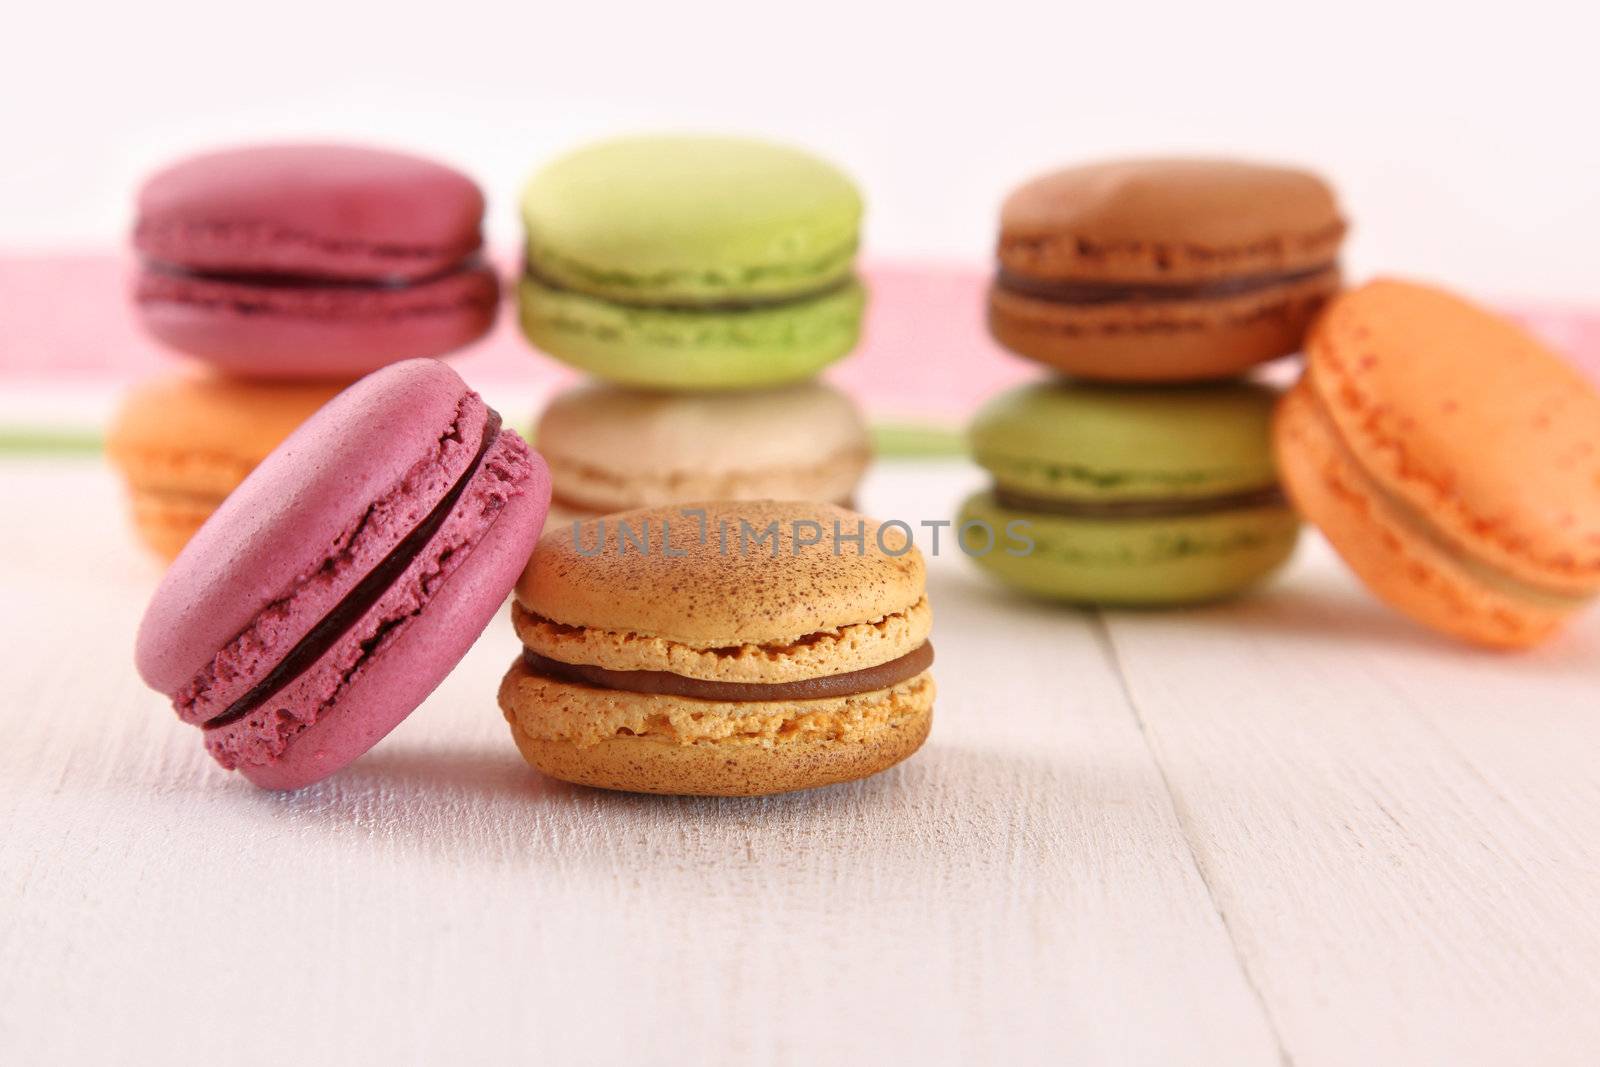 Delicious macaroons on wood table by Sandralise